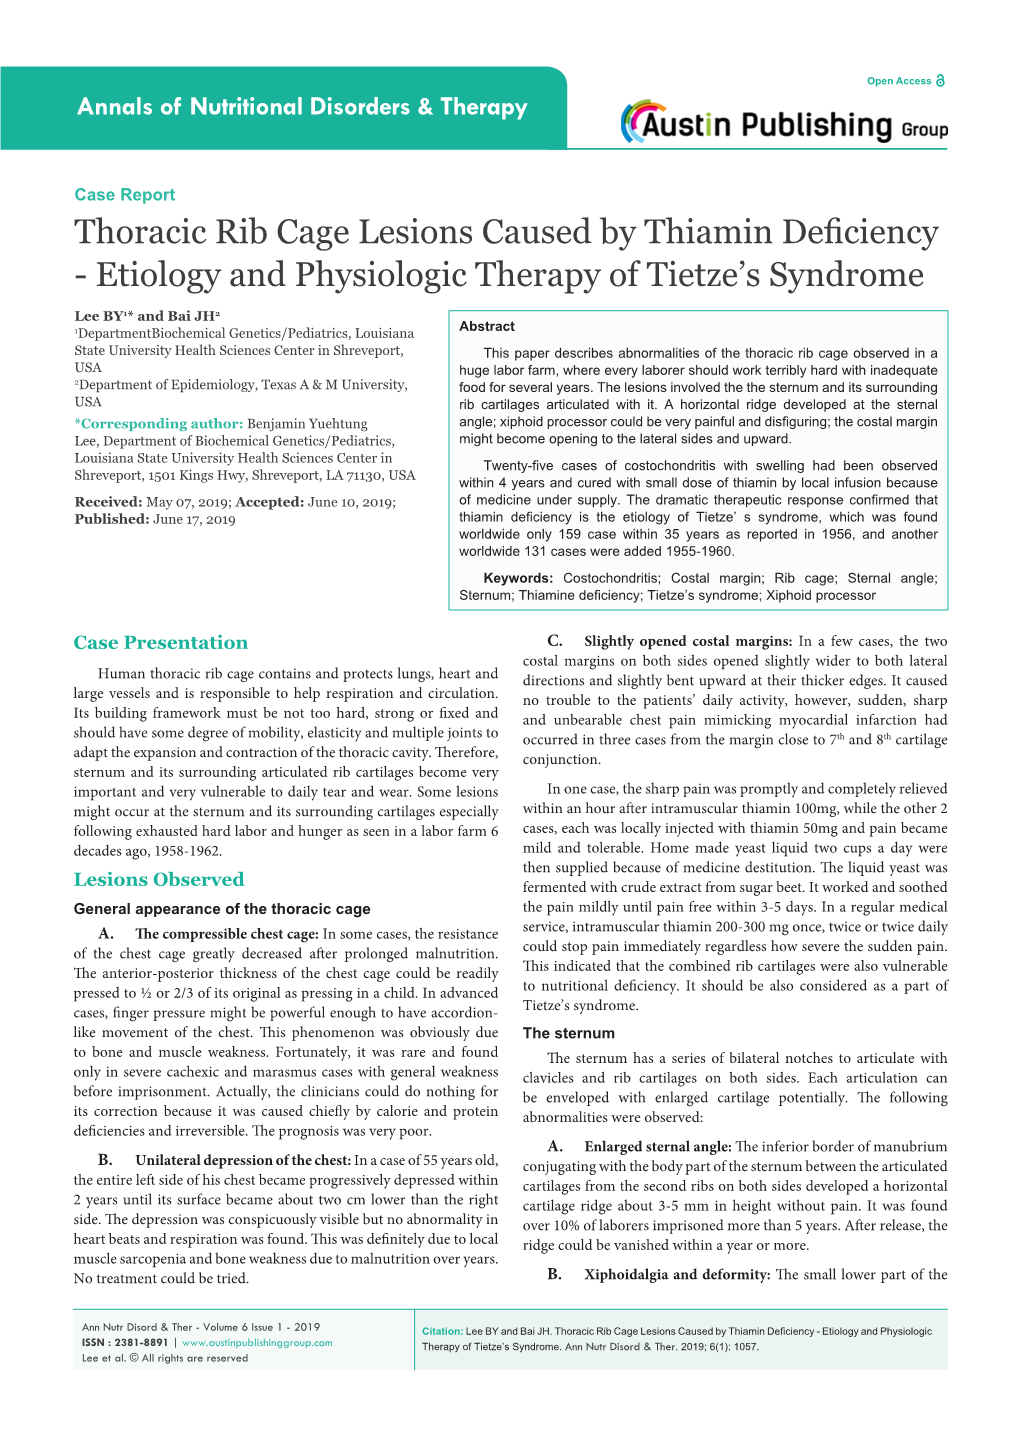 Thoracic Rib Cage Lesions Caused by Thiamin Deficiency - Etiology and Physiologic Therapy of Tietze’S Syndrome